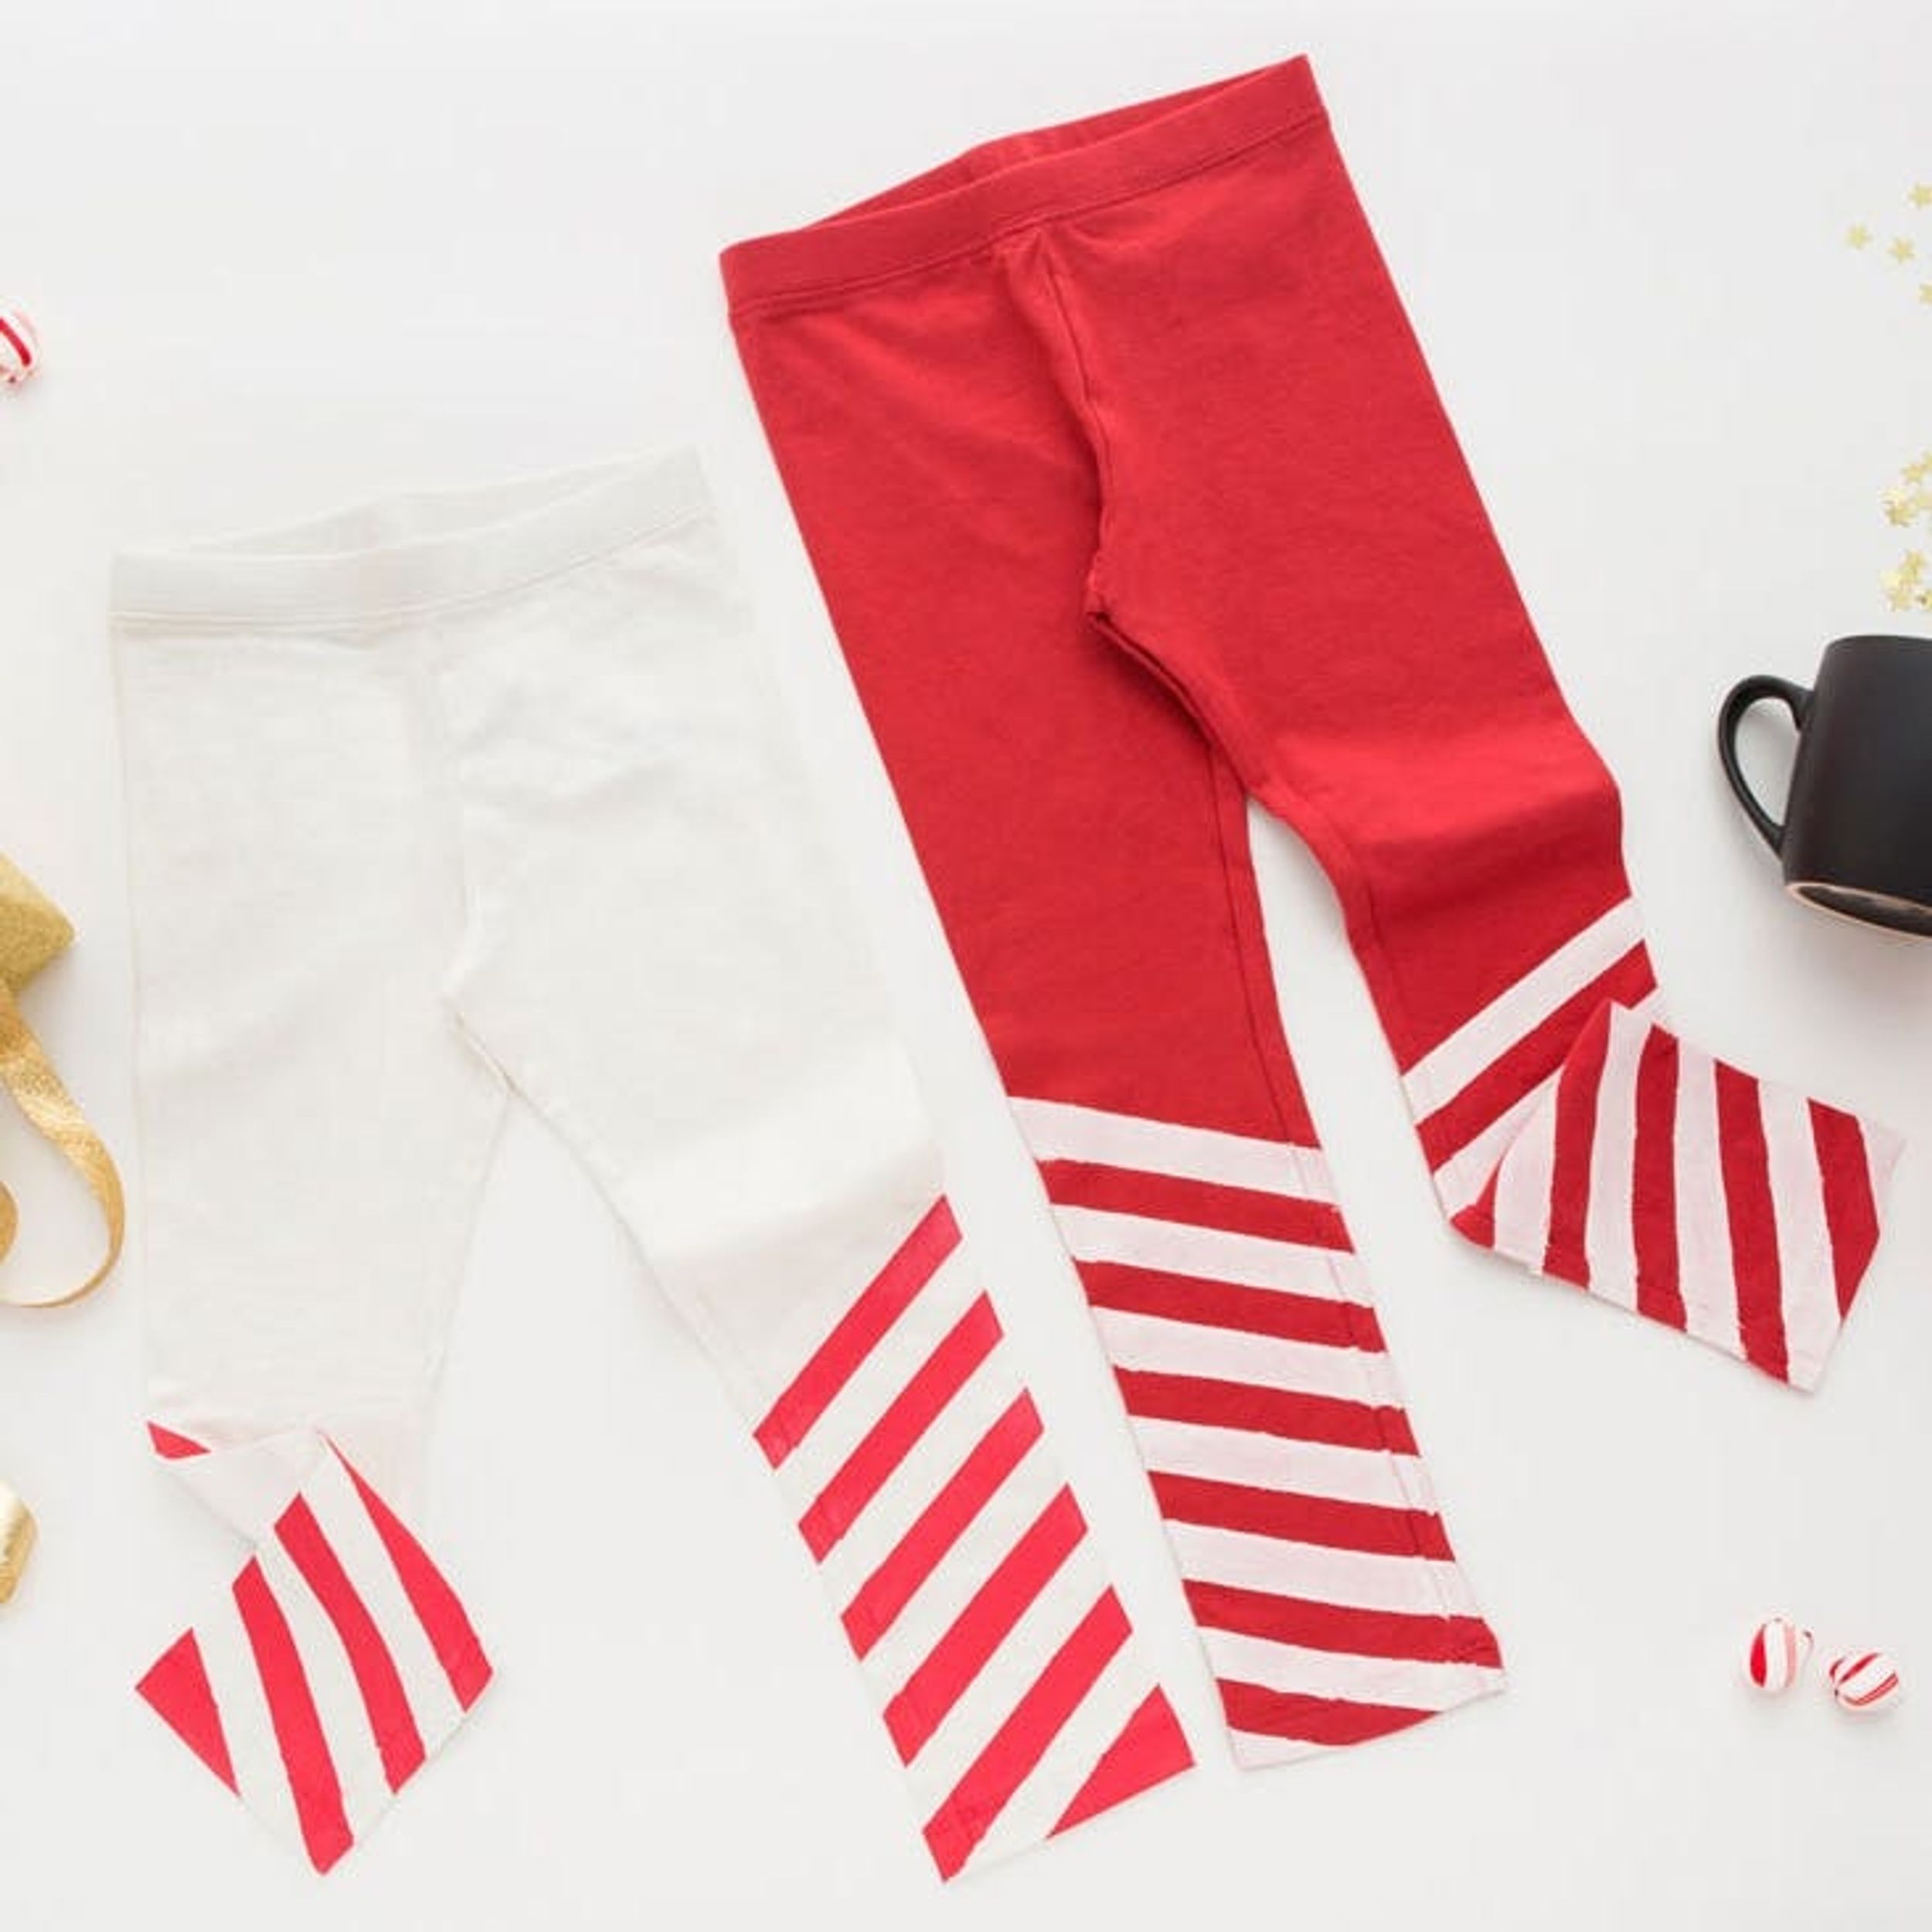 Enter to Win Adorable Holiday Leggings Kits for Your Kids!